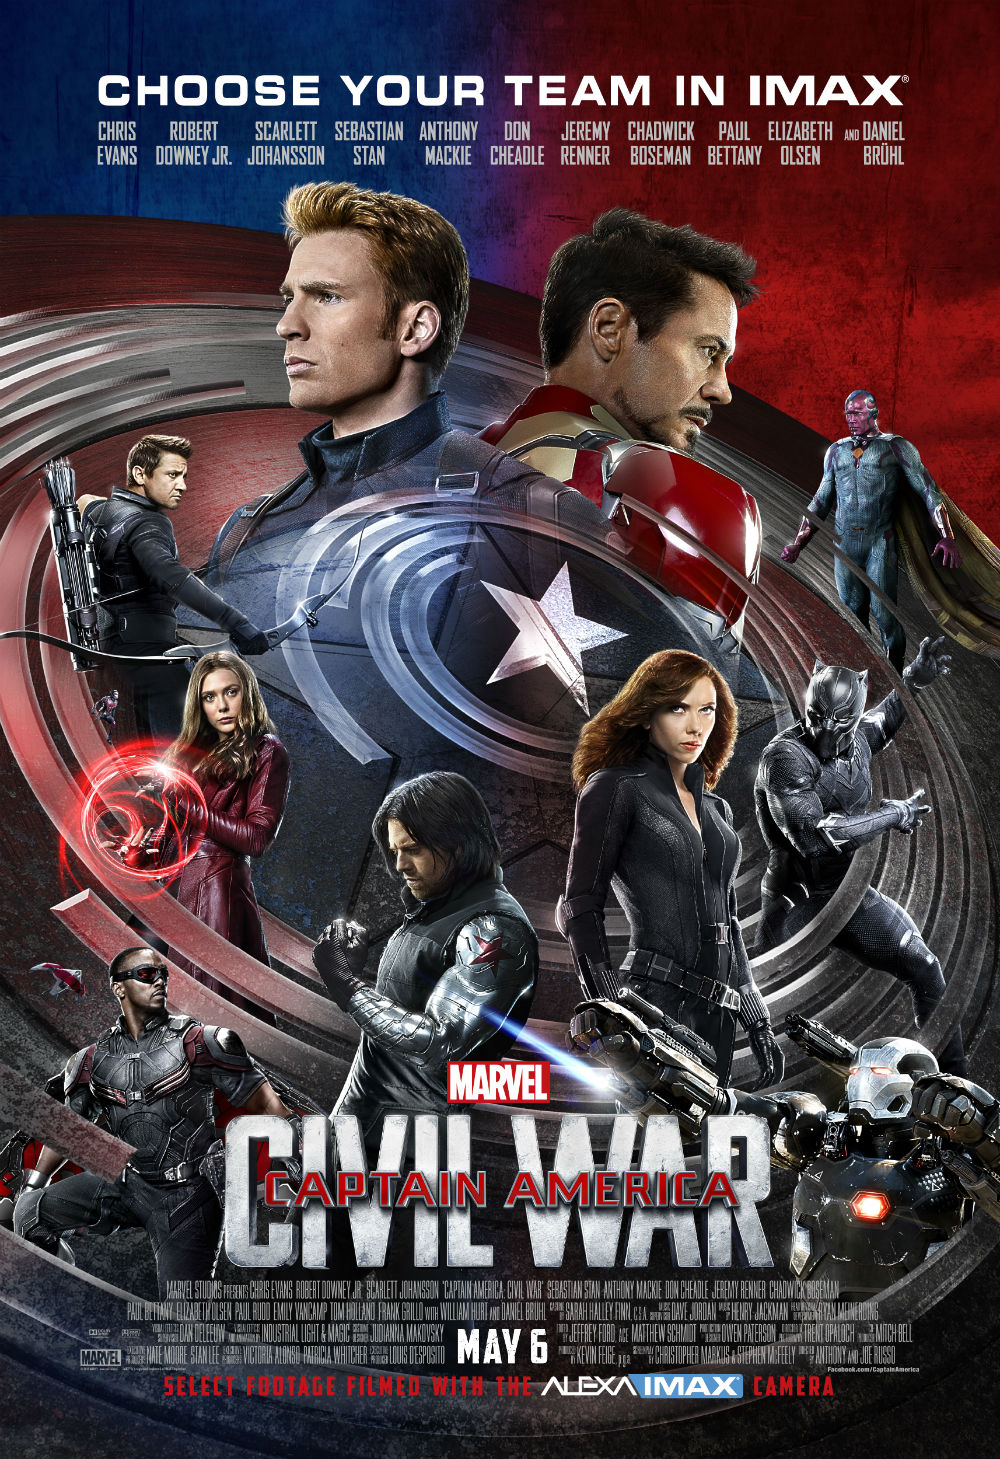 Choose A Side With This Exclusive Captain America: Civil War IMAX Poster